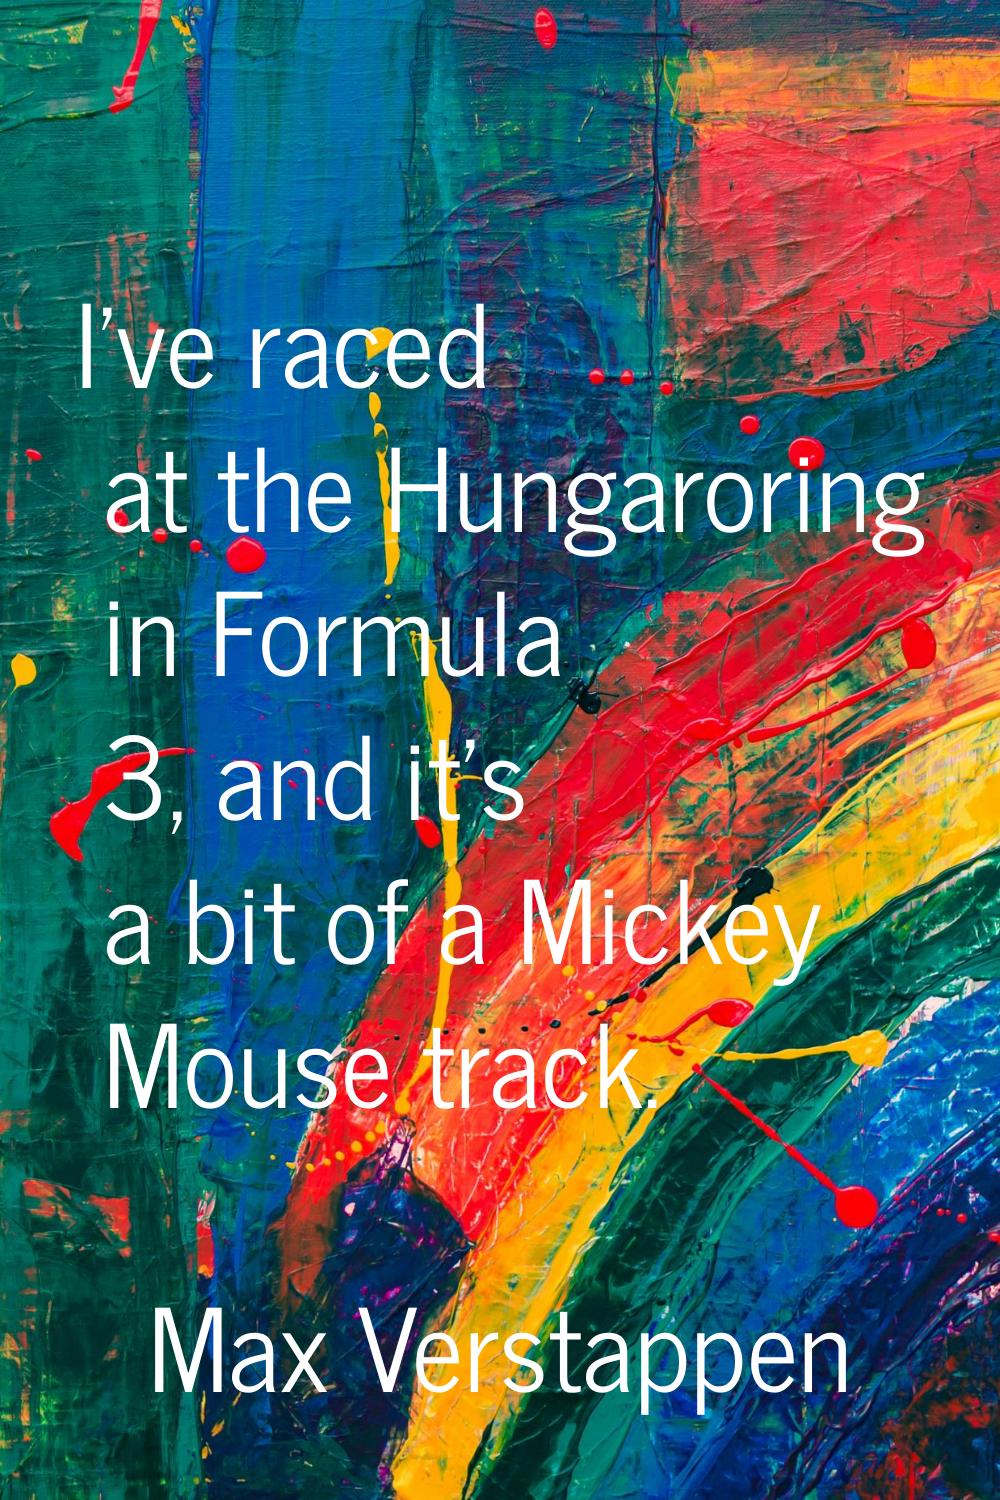 I've raced at the Hungaroring in Formula 3, and it's a bit of a Mickey Mouse track.